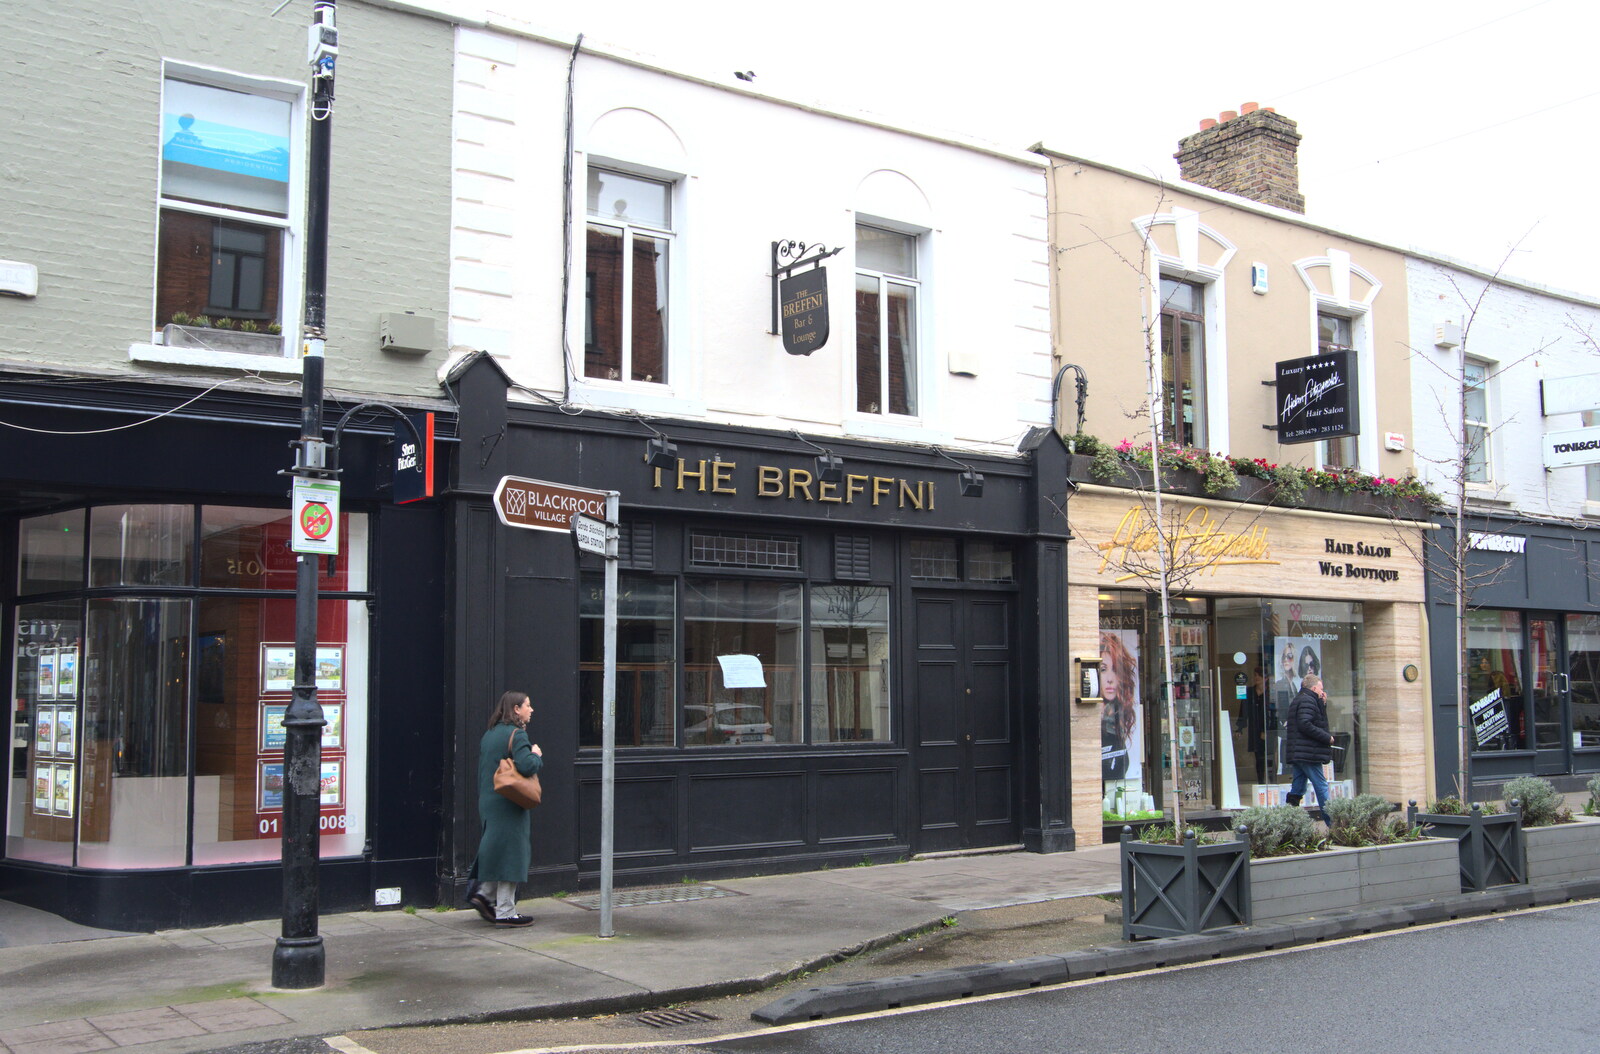 The End of the Breffni, Blackrock, Dublin - 18th February 2023: Another look at the Breffni